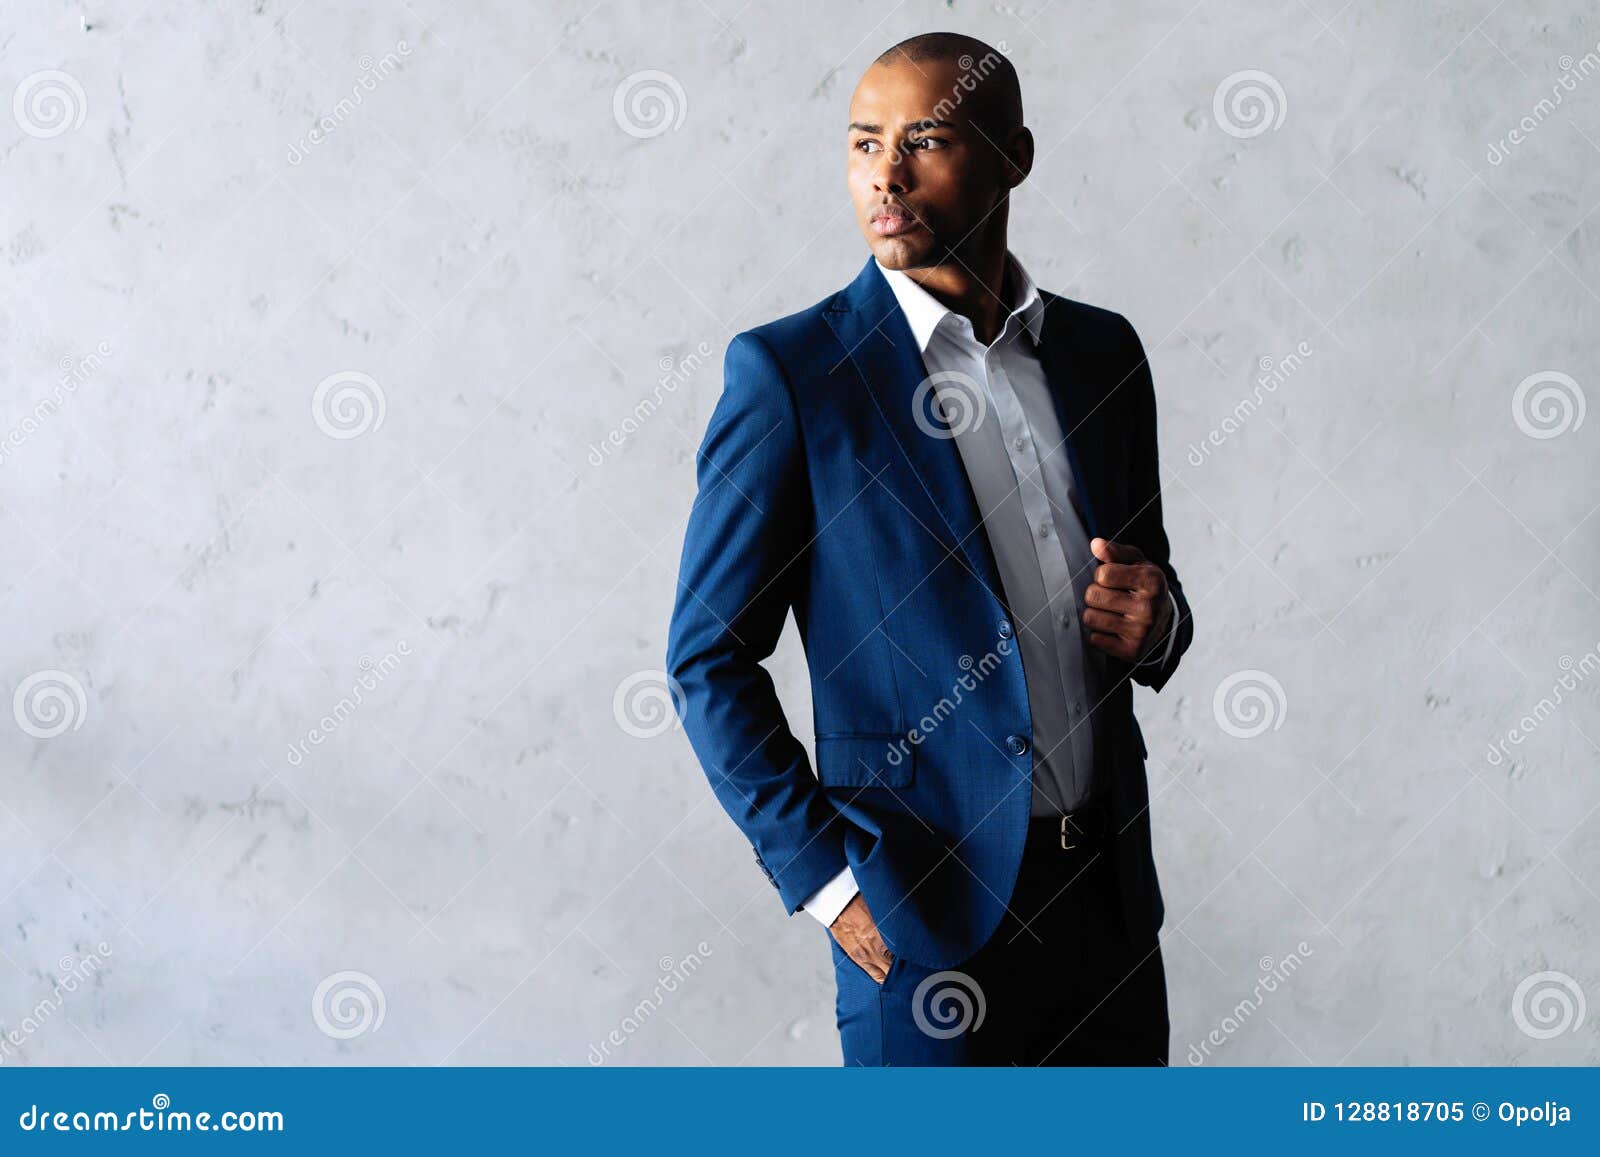 Cool African Businessman Standing on Grey Background. Stock Image ...